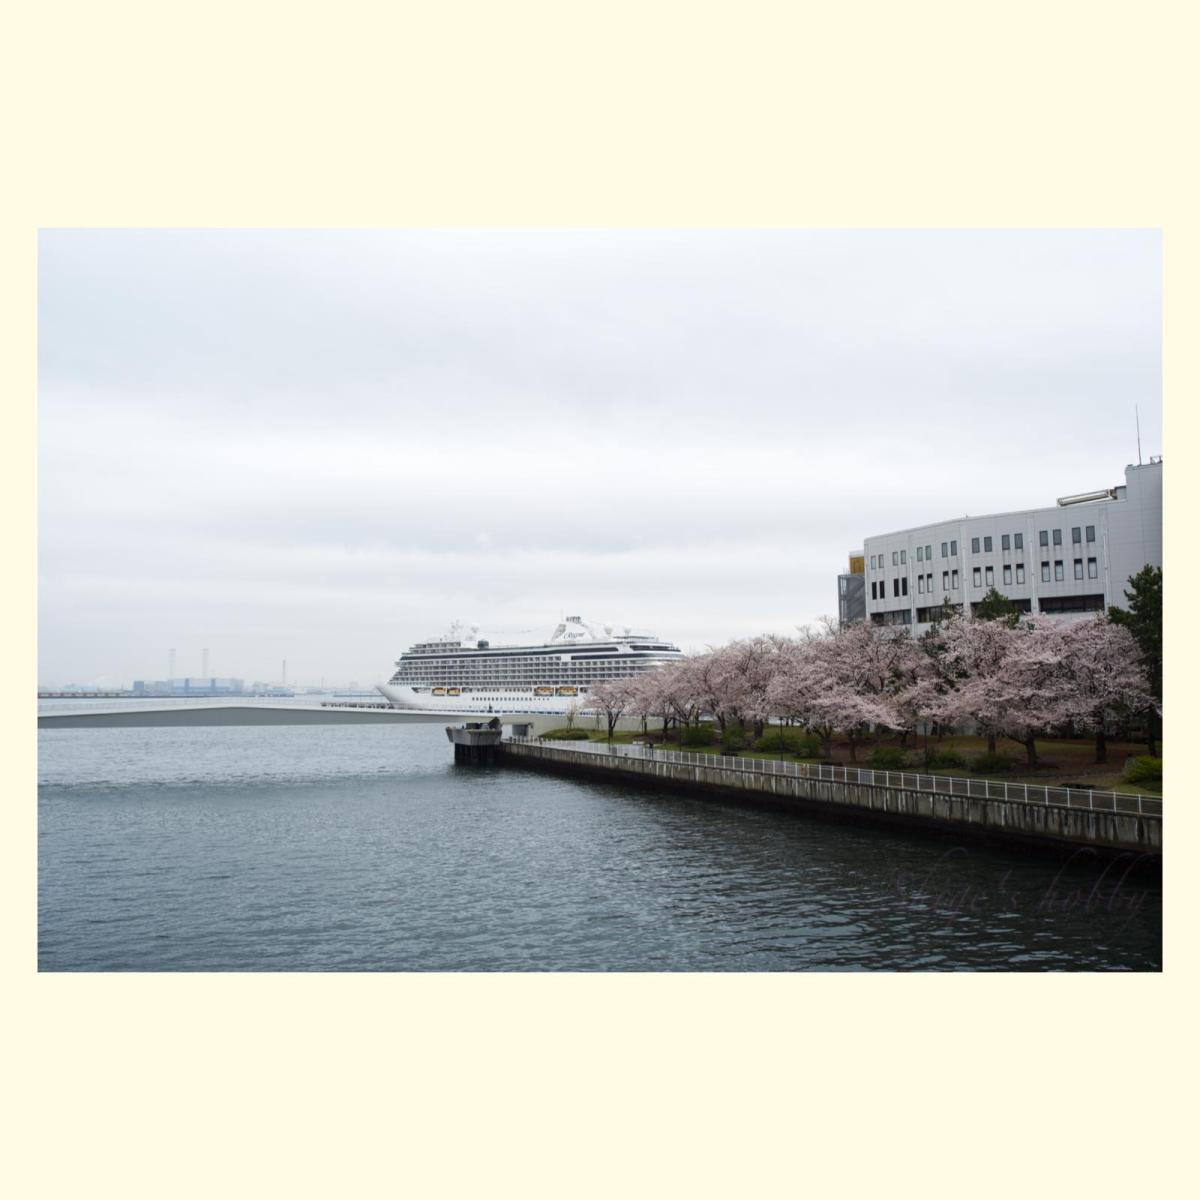 Cruise Ship and Cherry Blossom